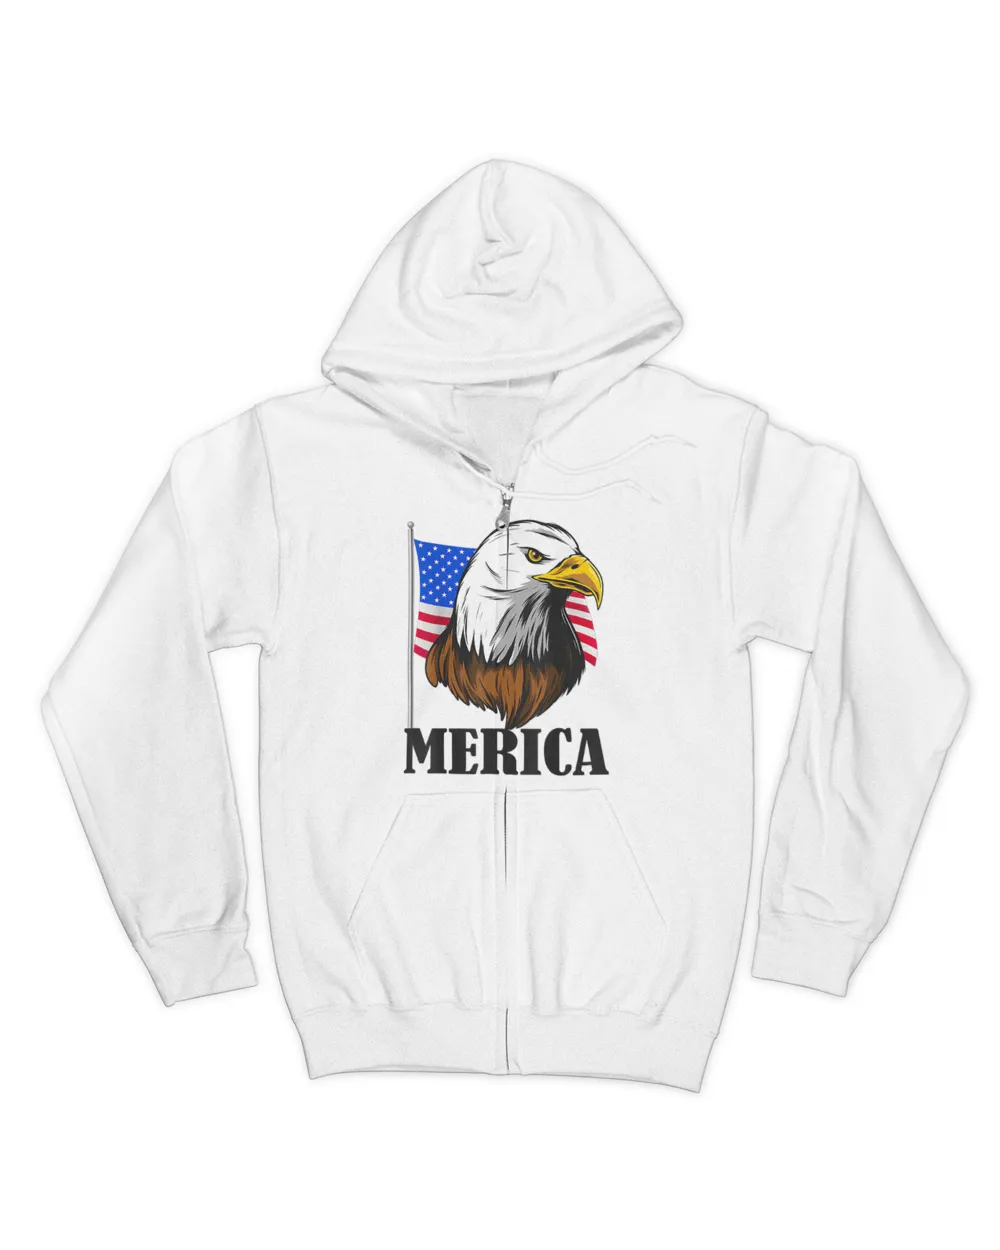 Merica Bald Eagle Independence Day Patriot USA